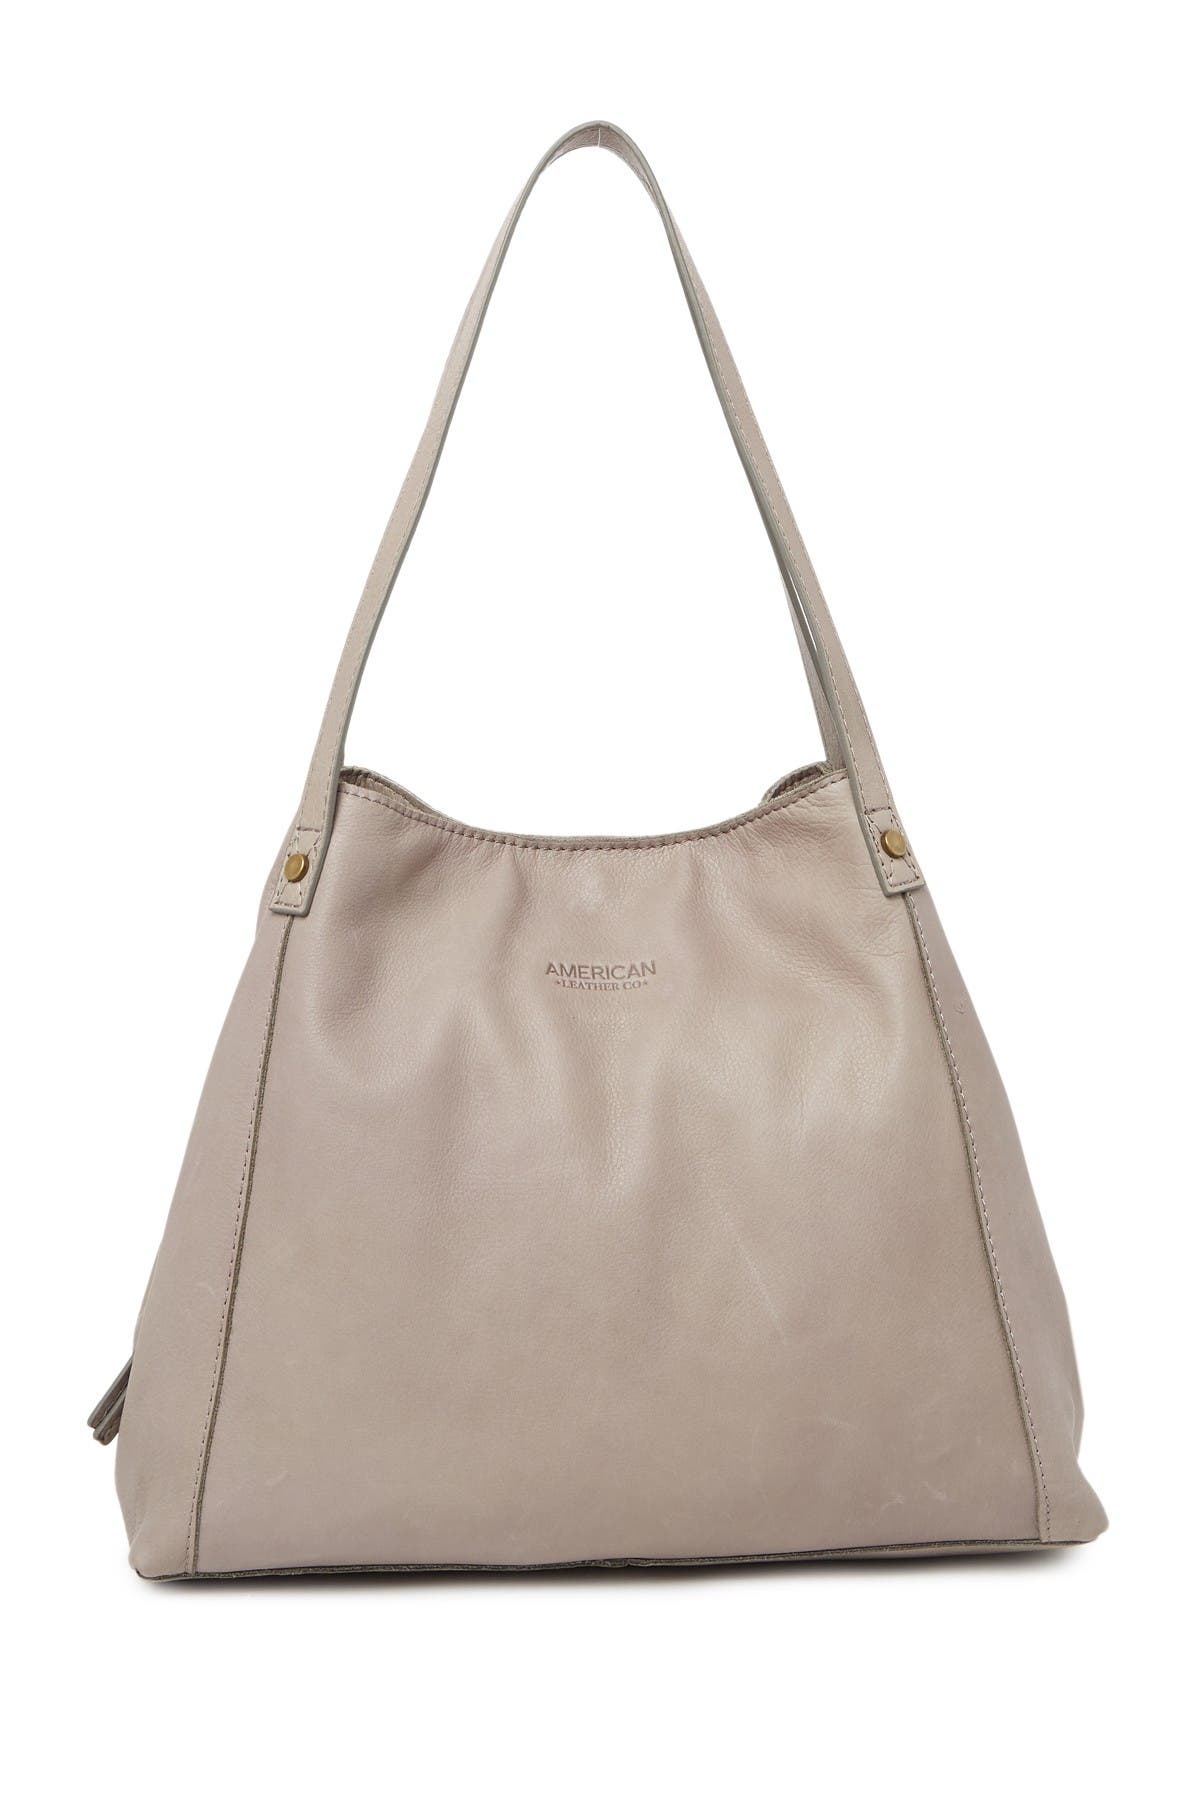 American Leather Co. Liberty Shopper Bag In Ash Grey Smooth